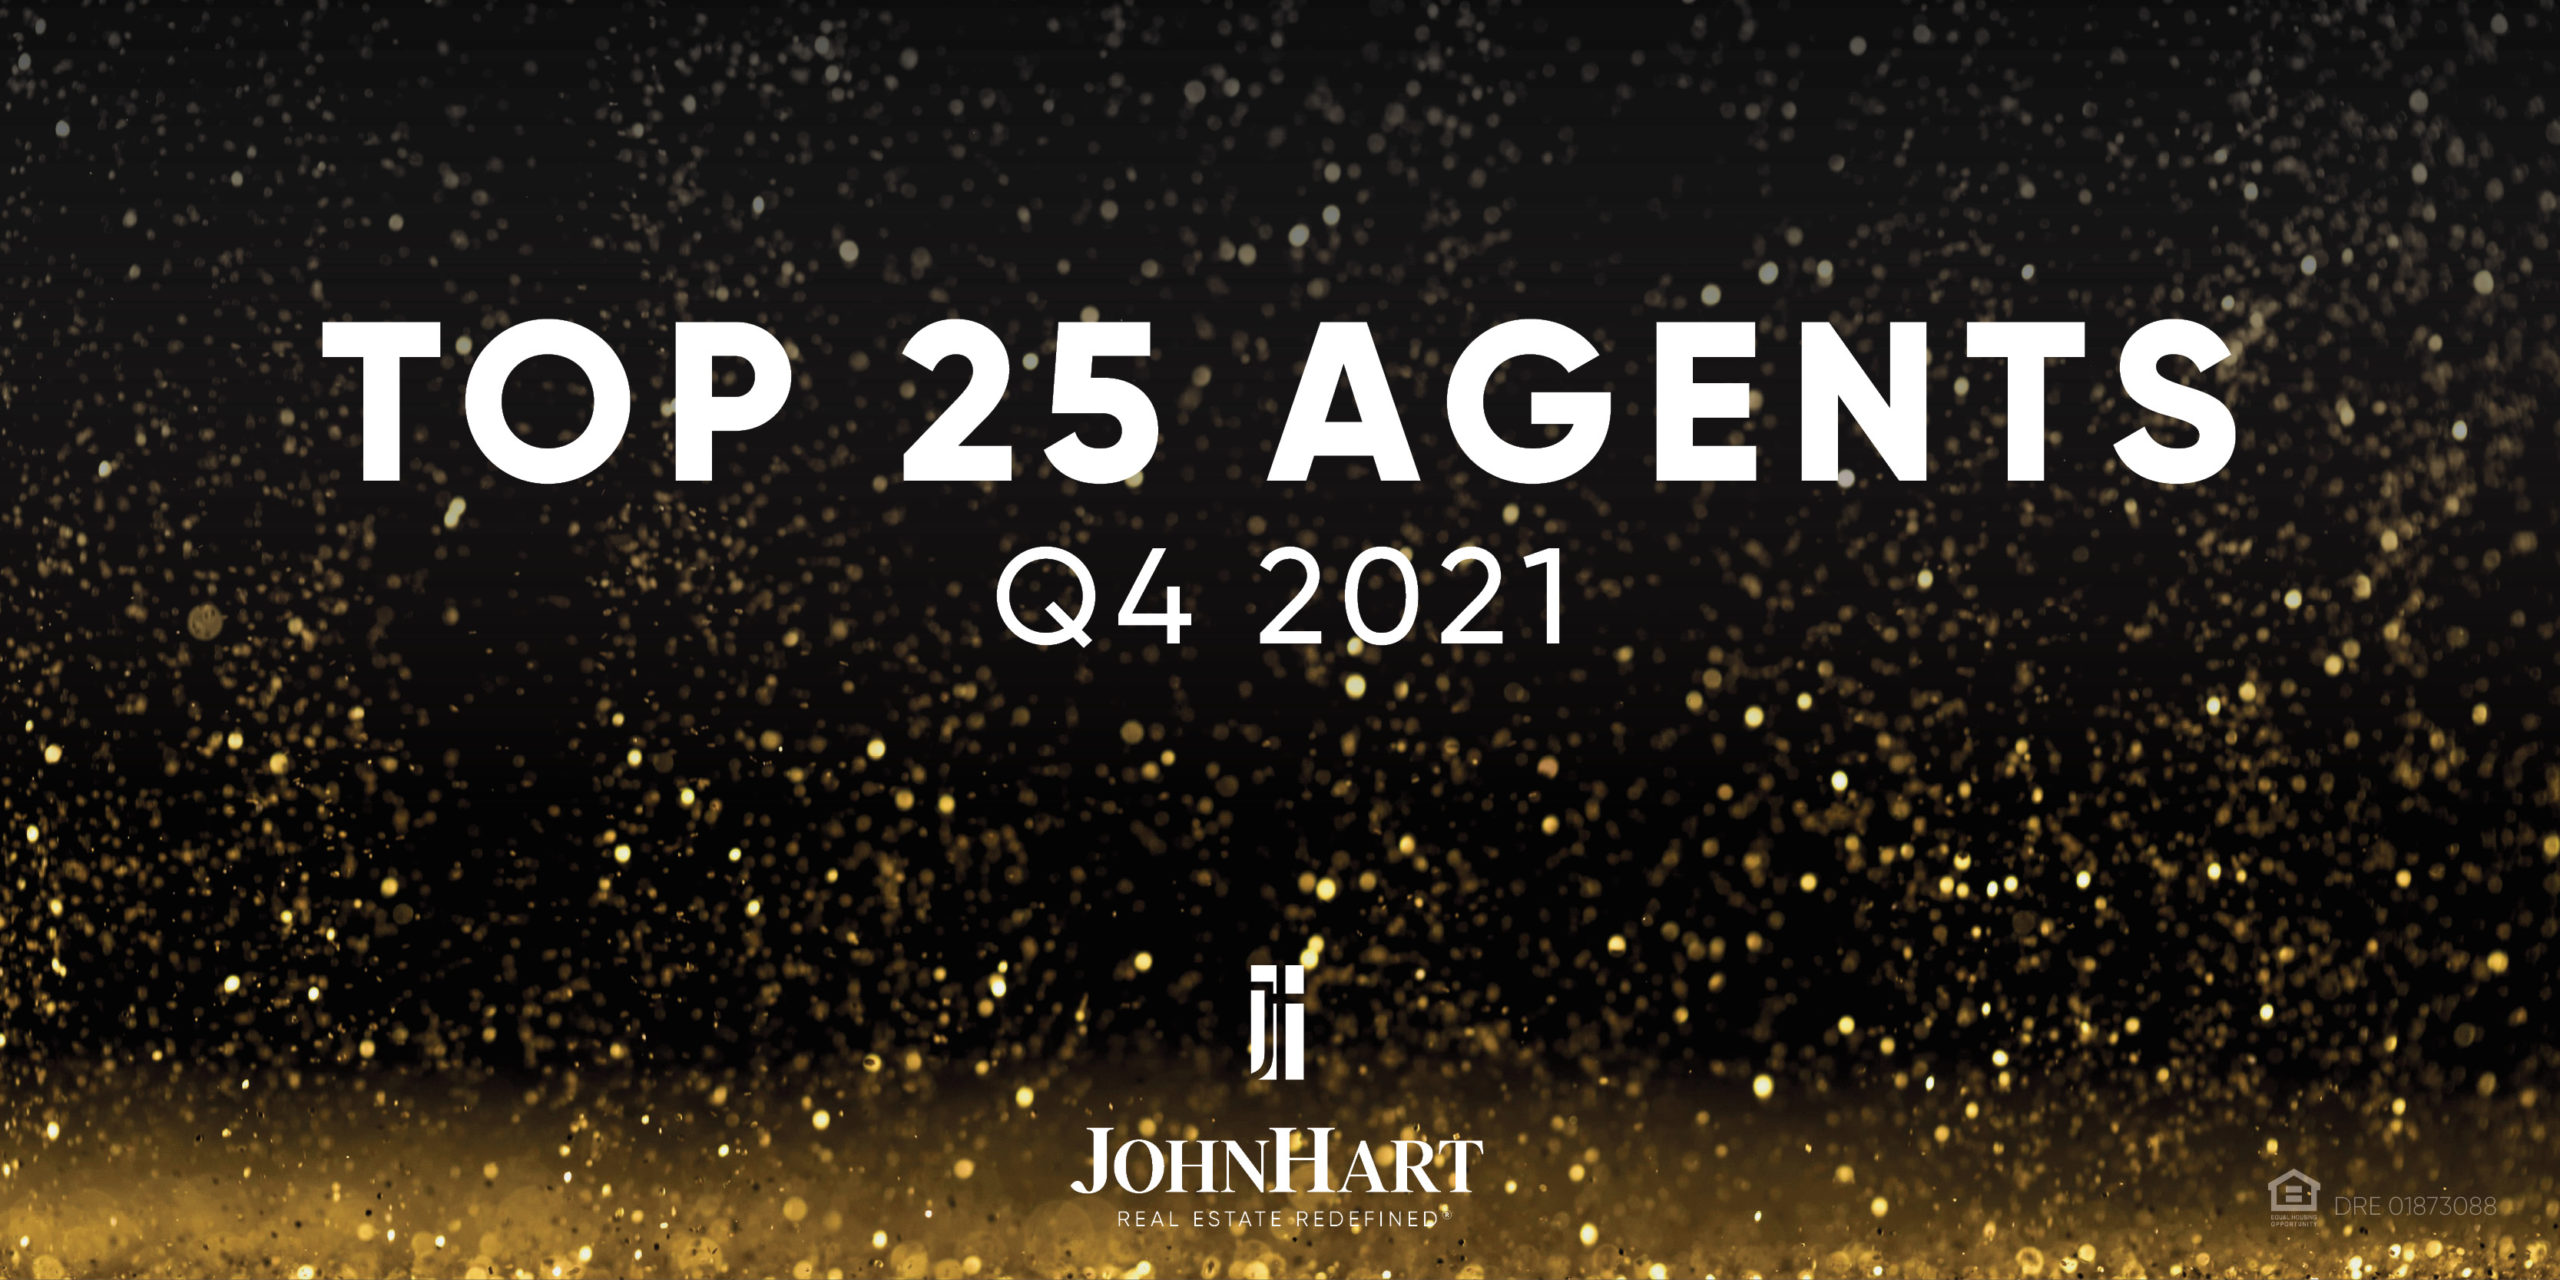 The Top 25 Agents of Q4 2021